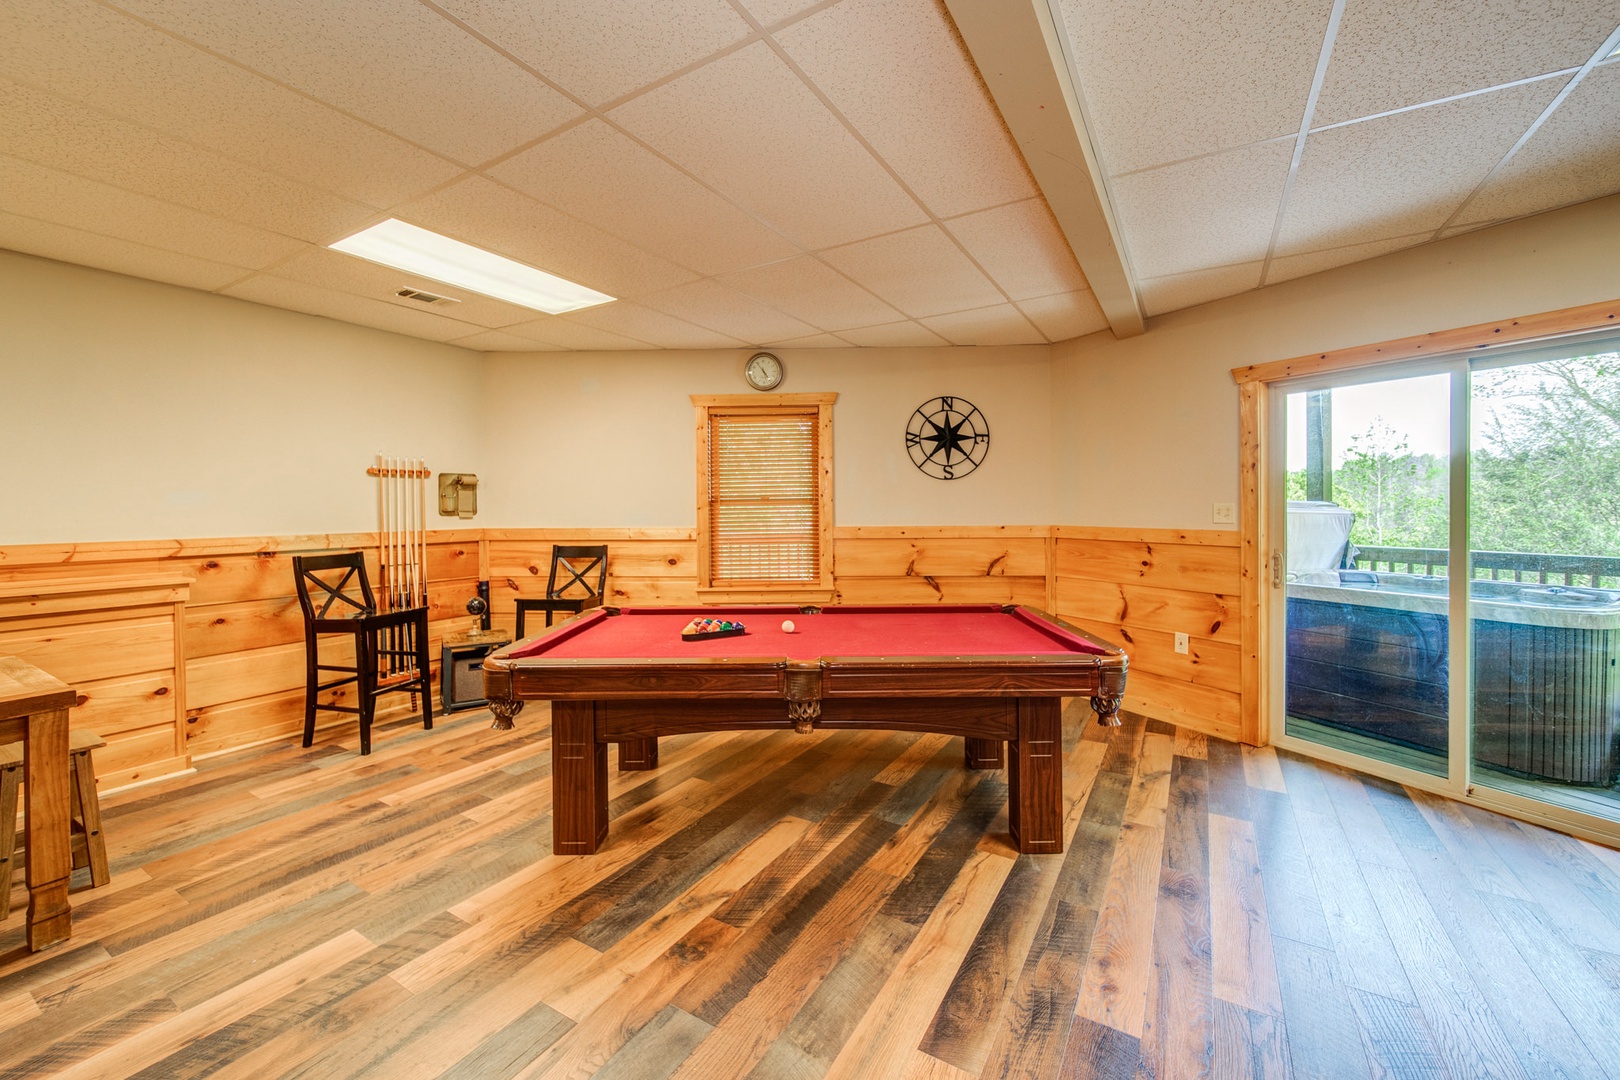 Recreational/ Game room with pool table